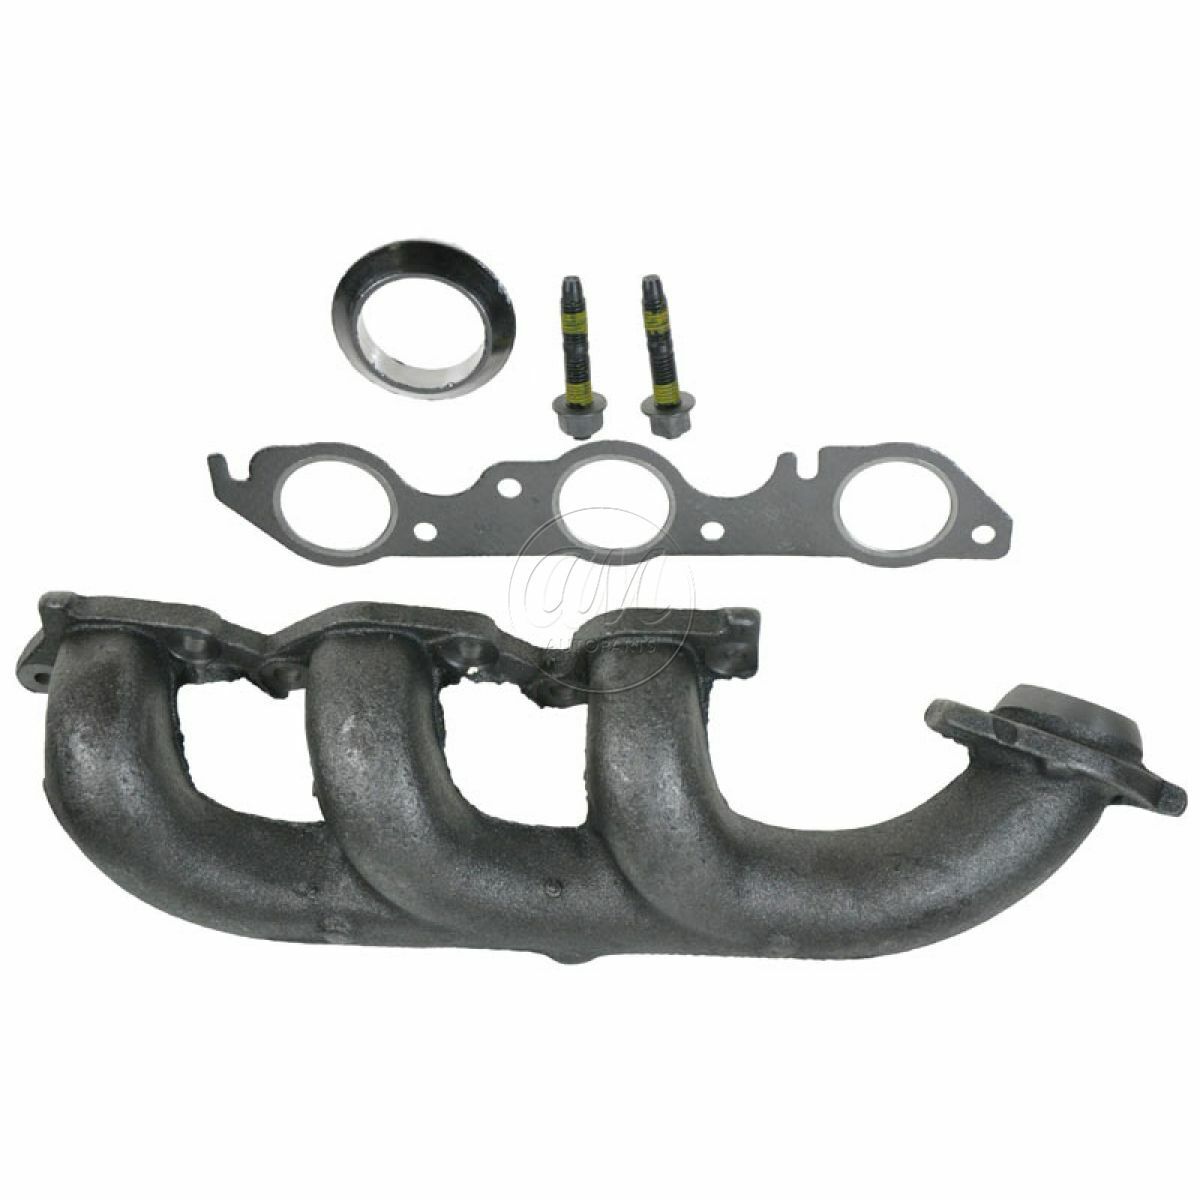 Dorman Exhaust Manifold Front for Chevy Buick Olds Pontiac 3.8L